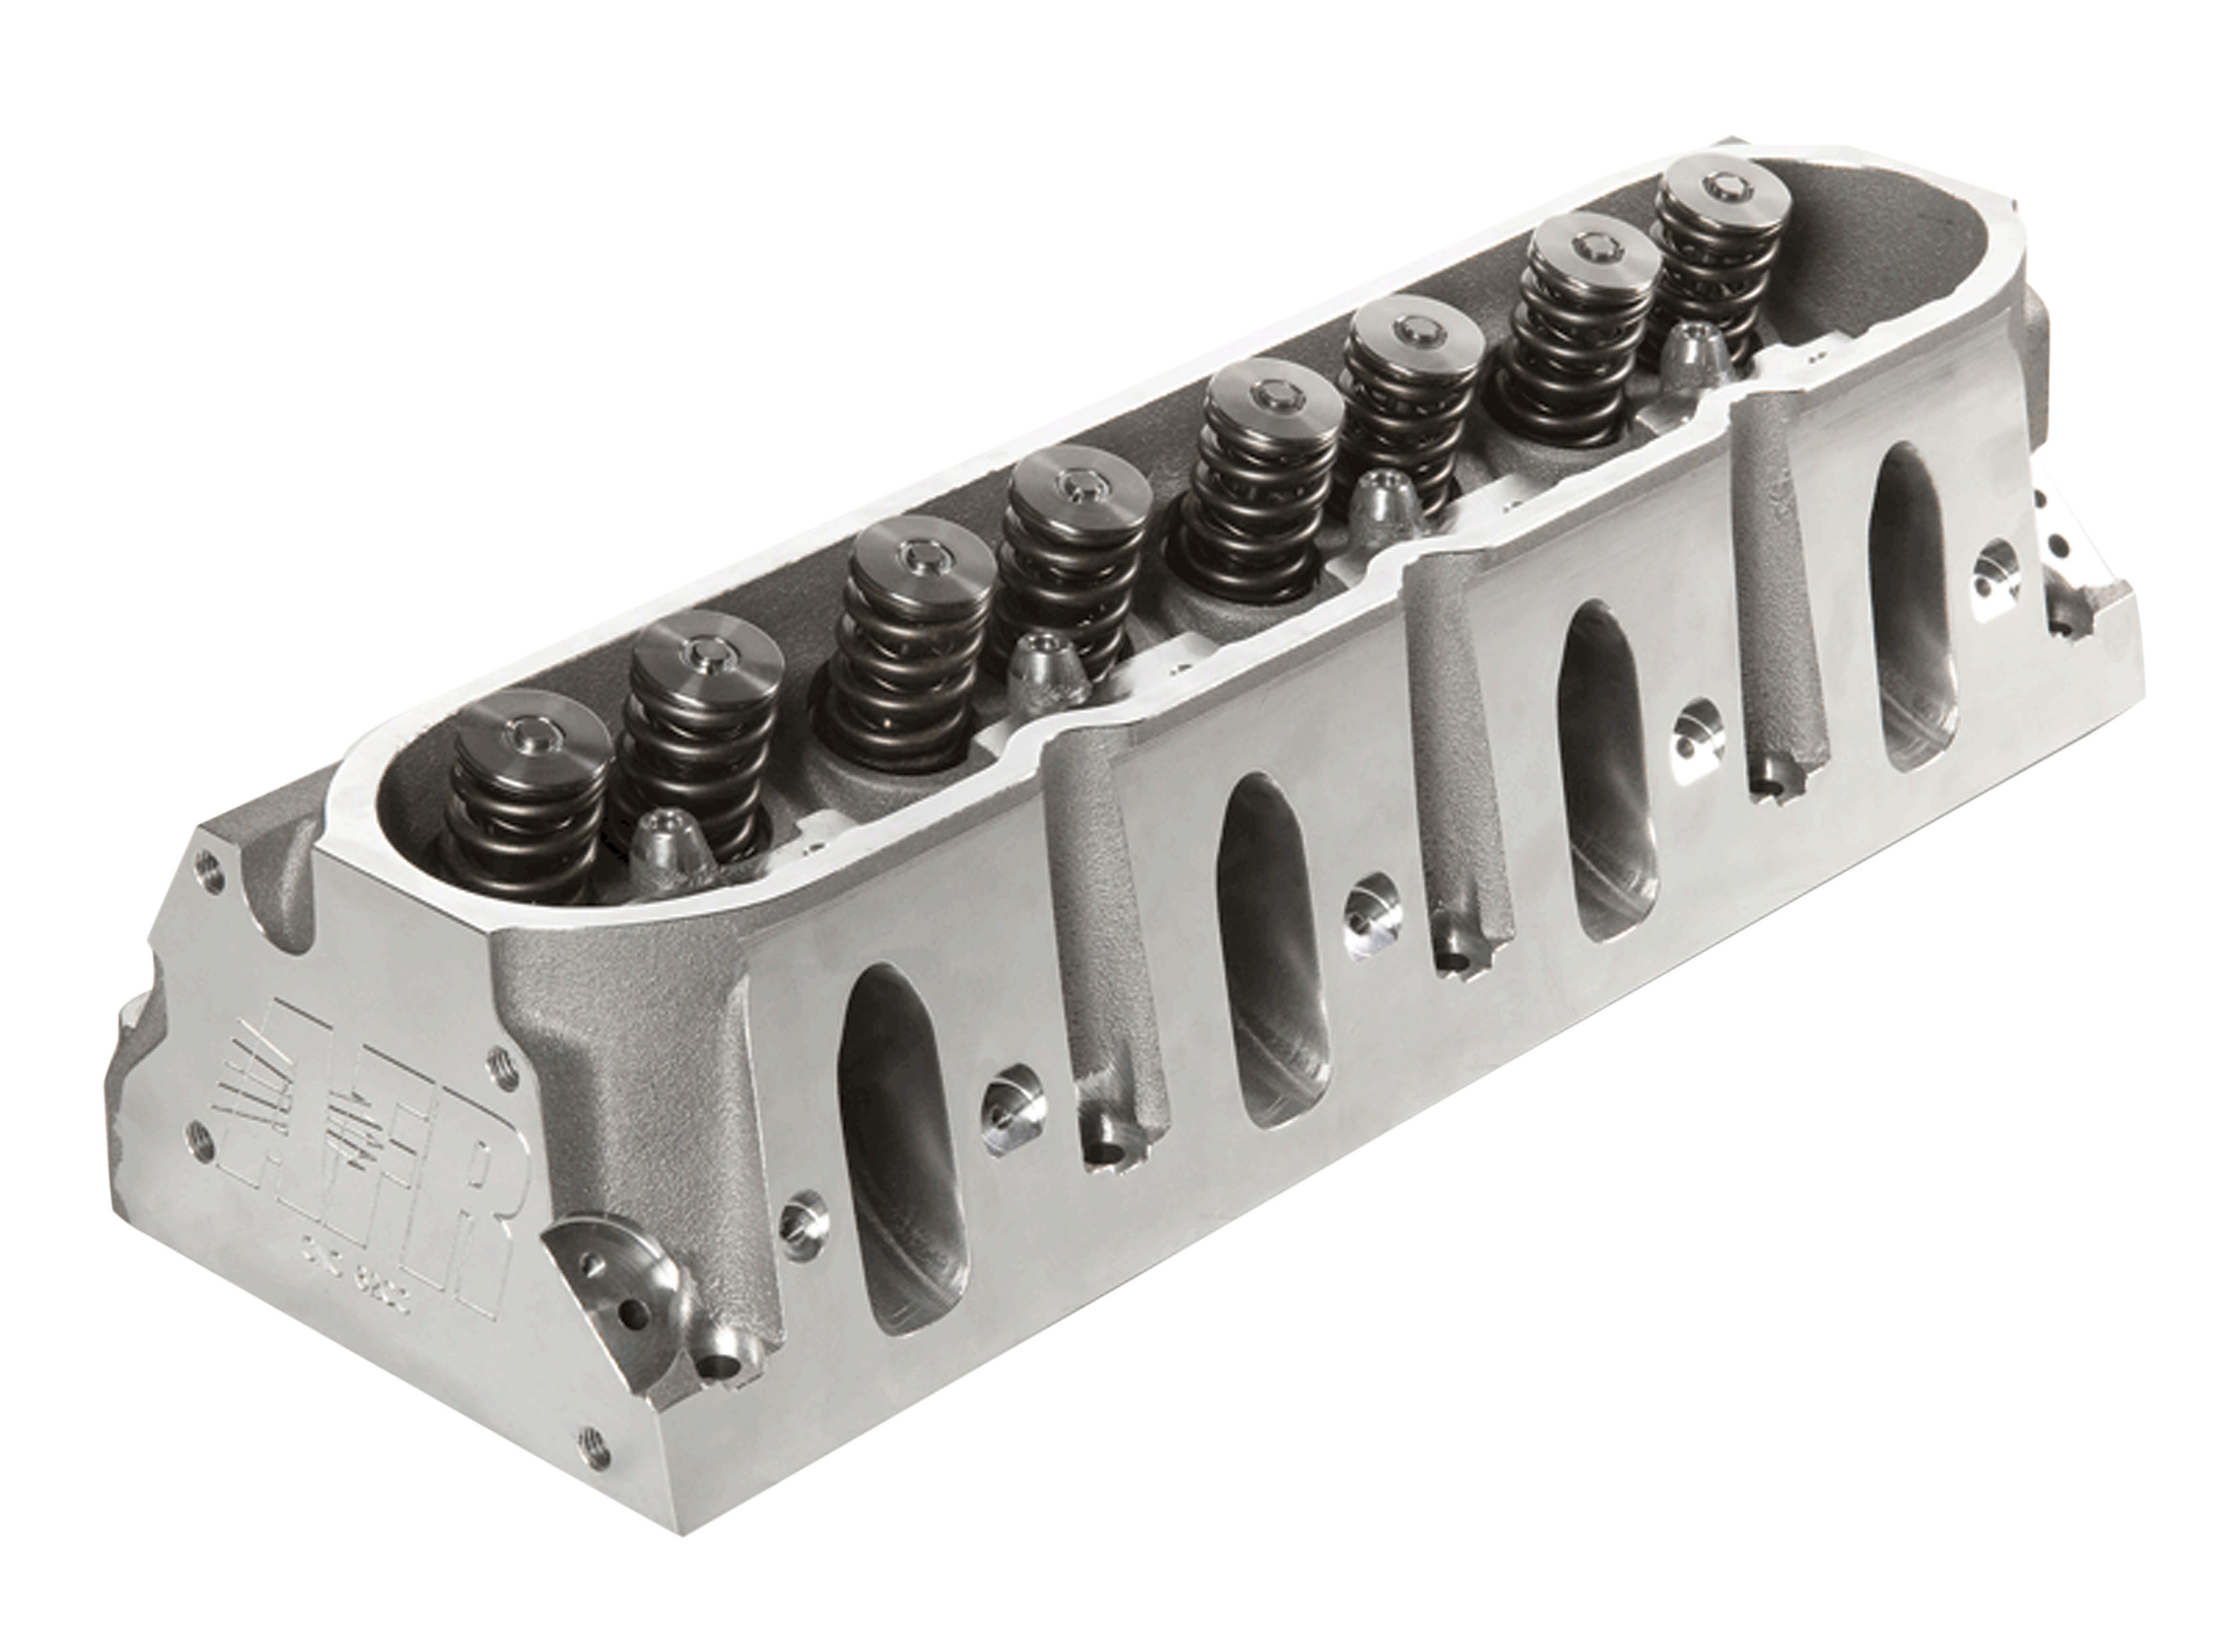 AFR LSx 245cc Fully CNC Ported Cylinder Heads, 72cc Chambers, Large Bore, Complete No Parts